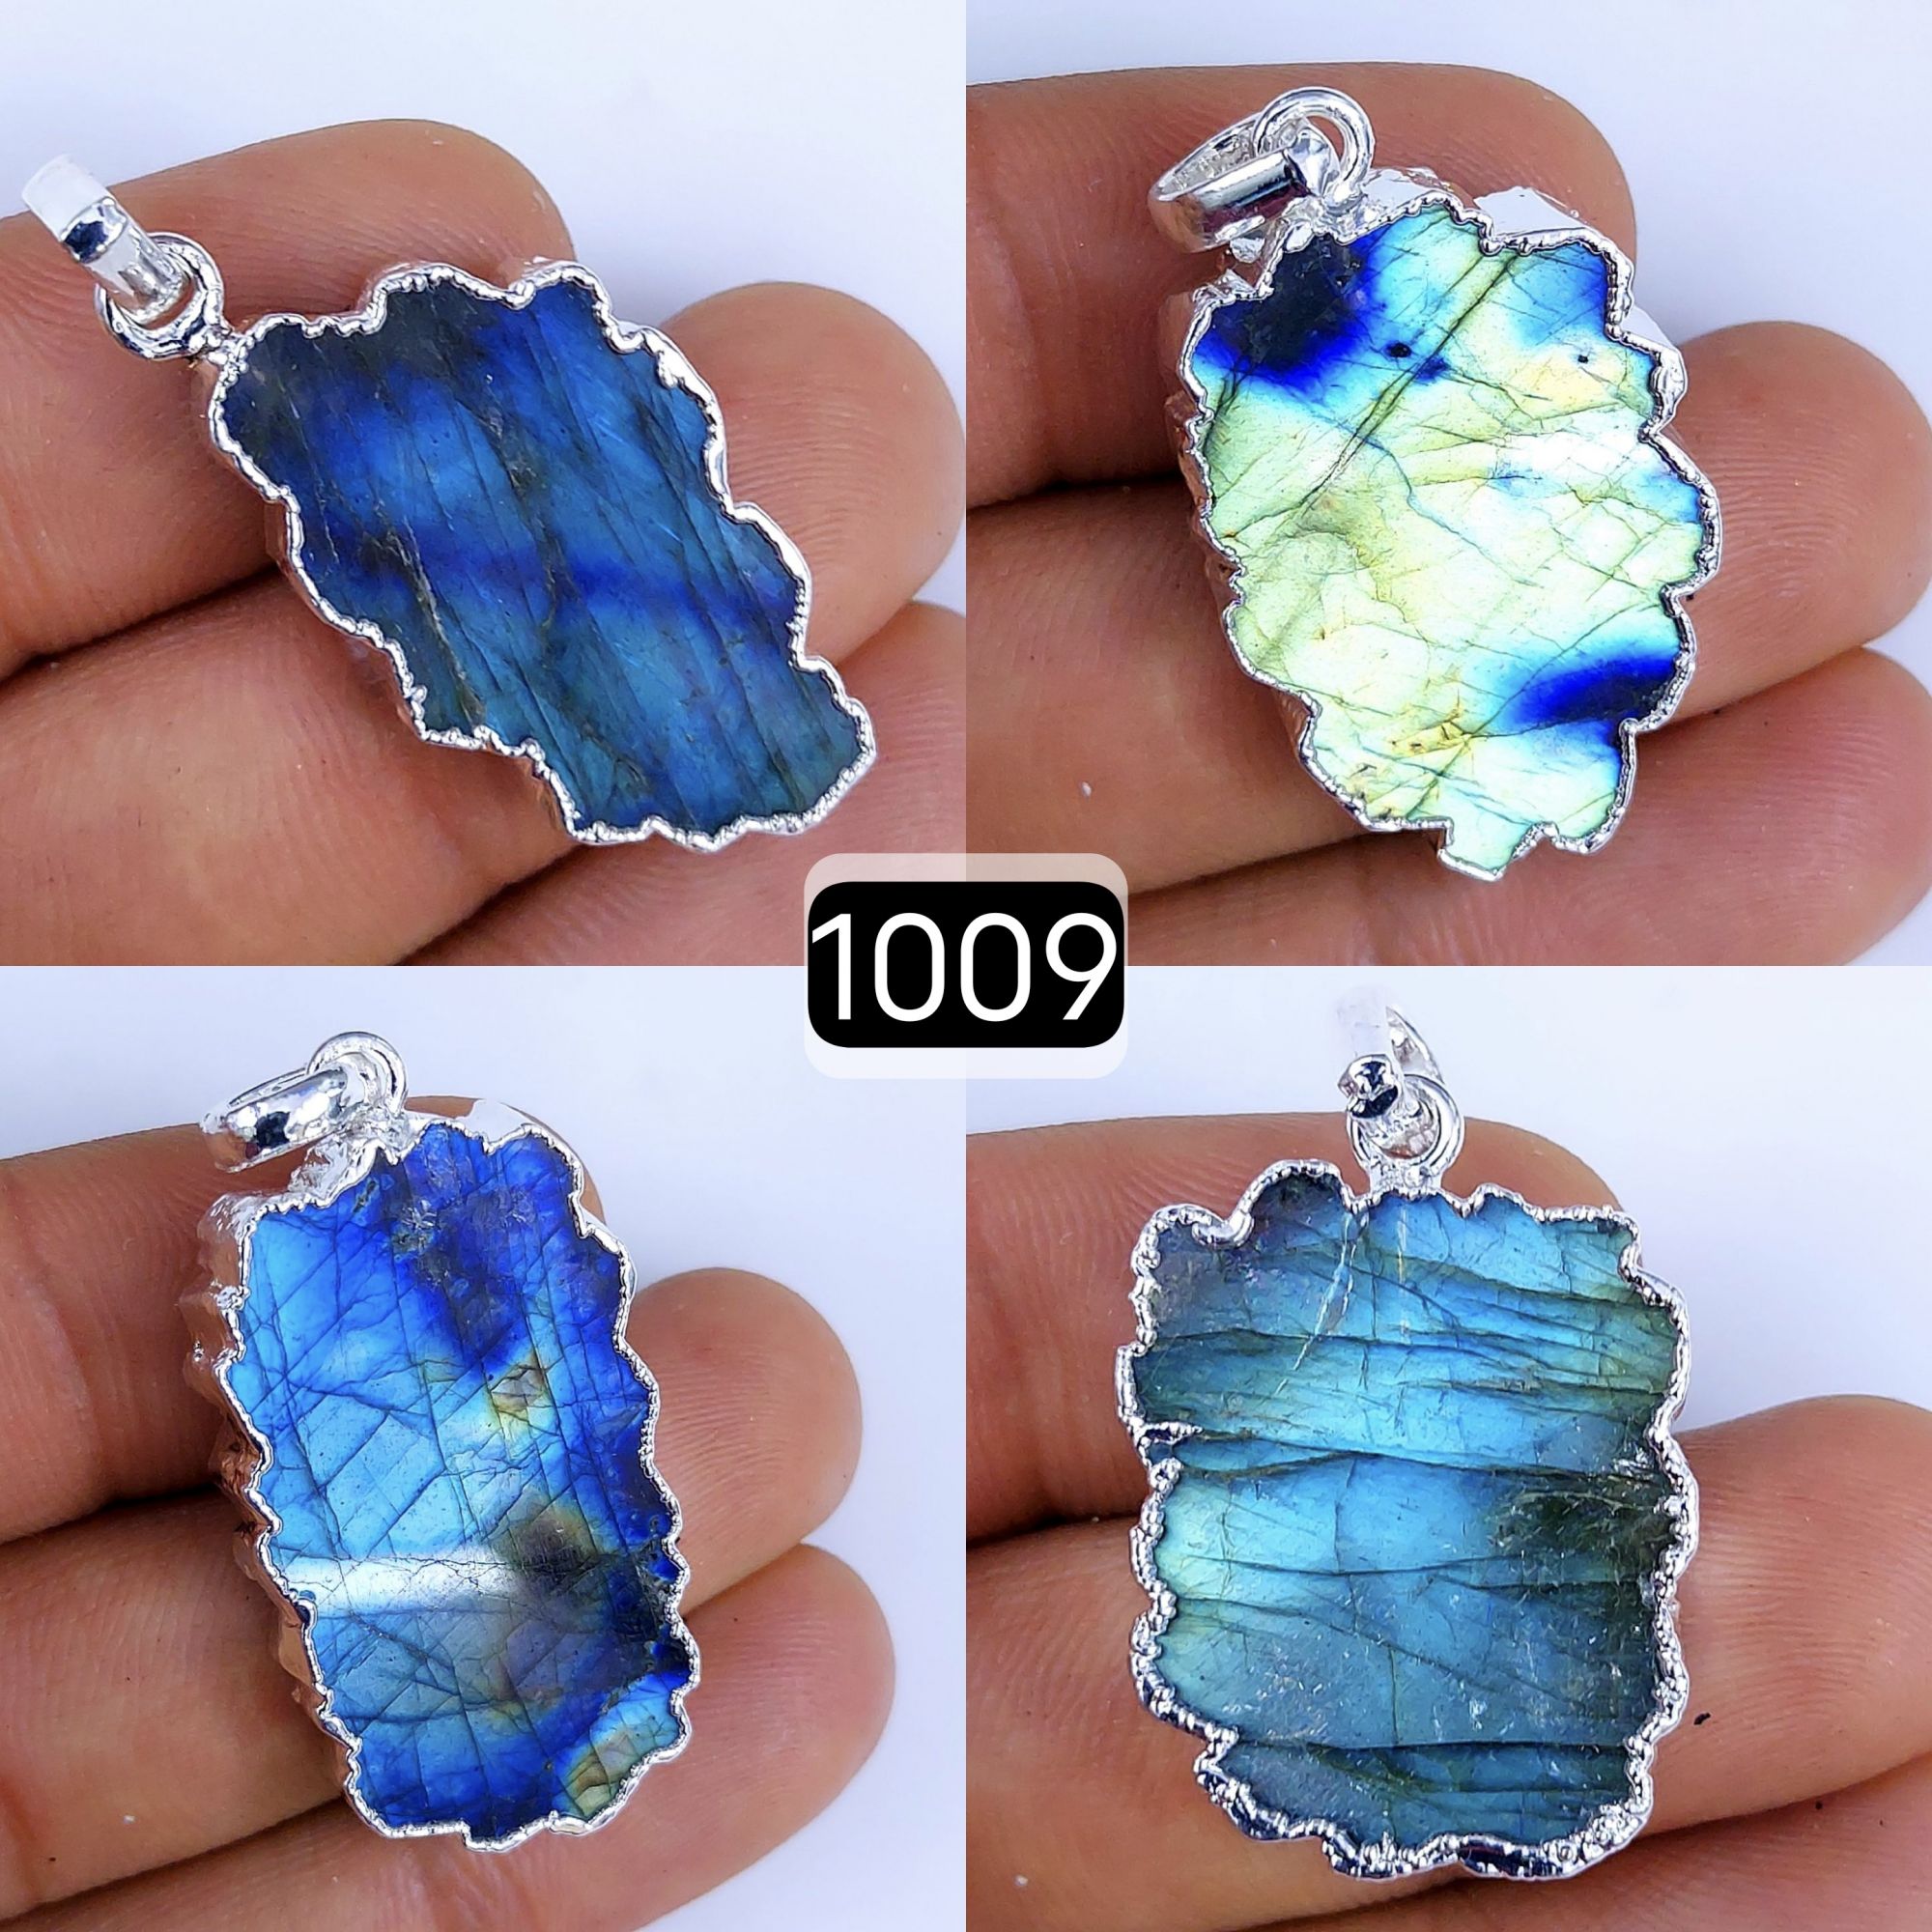 162Cts Natural Blue Labradorite Silver Electroplated Slice Pendant 32x18 22x12mm#1009